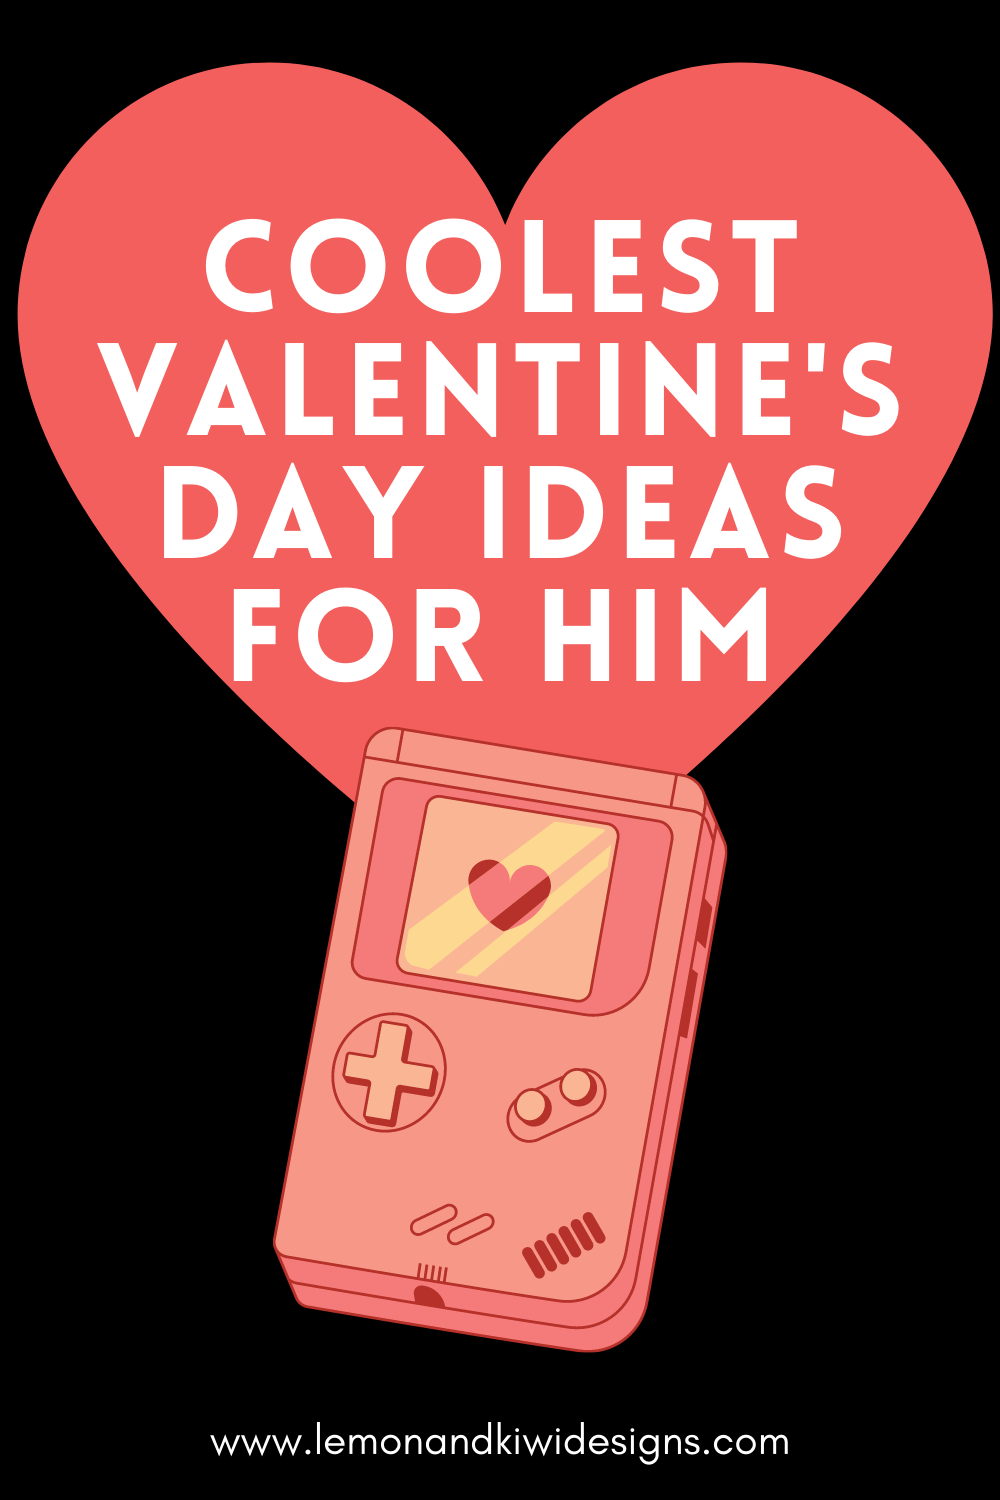 Coolest Valentine's Day Ideas For Him